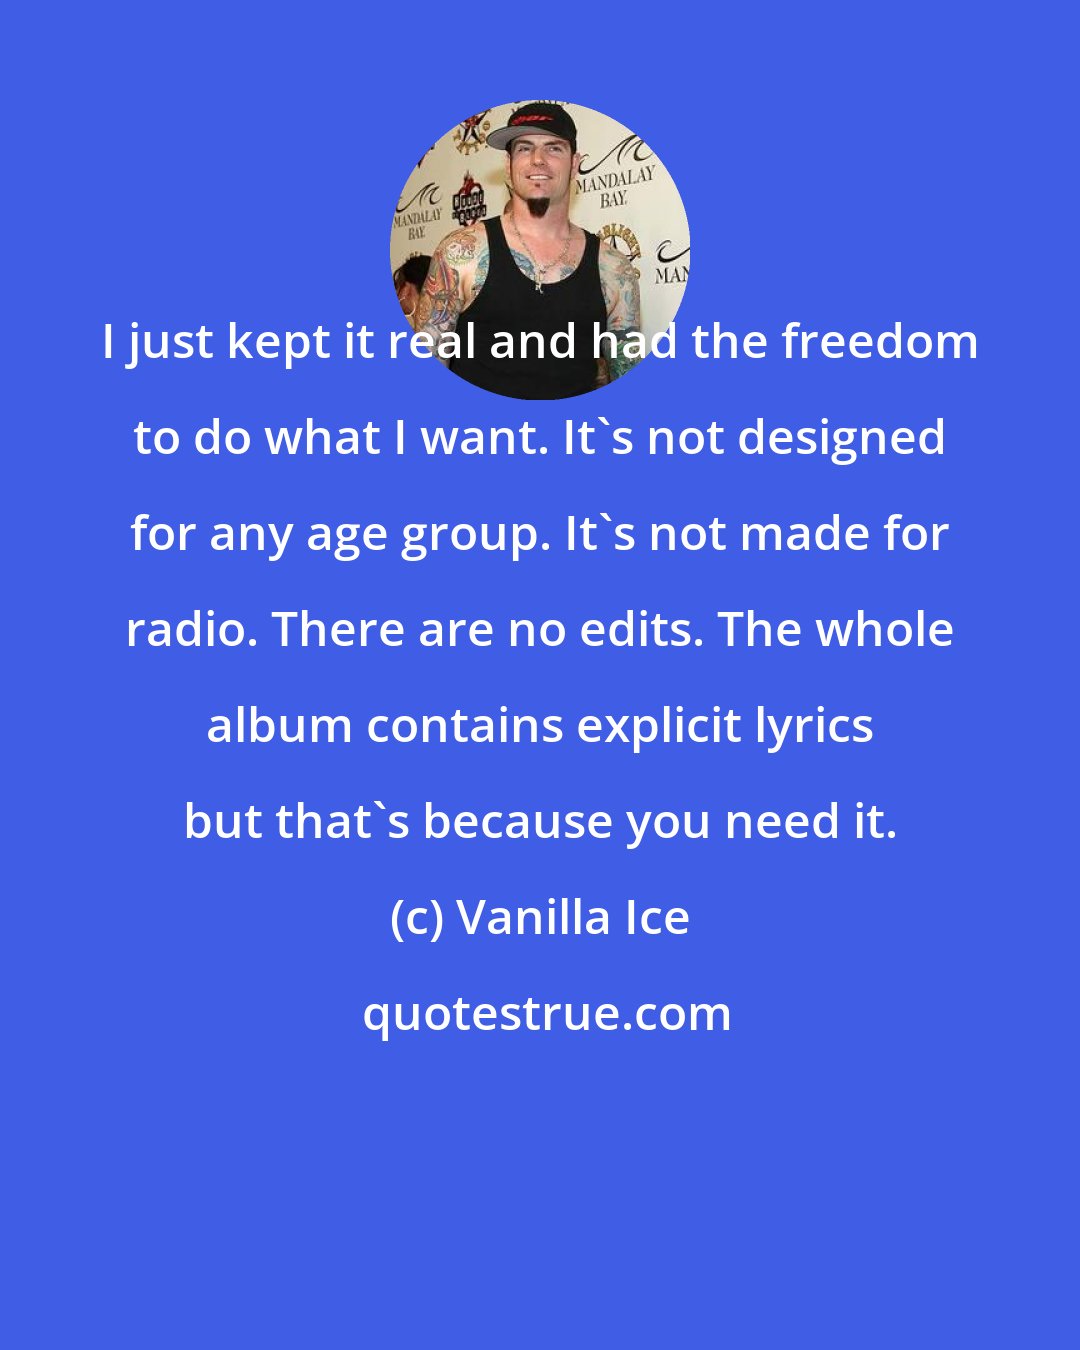 Vanilla Ice: I just kept it real and had the freedom to do what I want. It's not designed for any age group. It's not made for radio. There are no edits. The whole album contains explicit lyrics but that's because you need it.